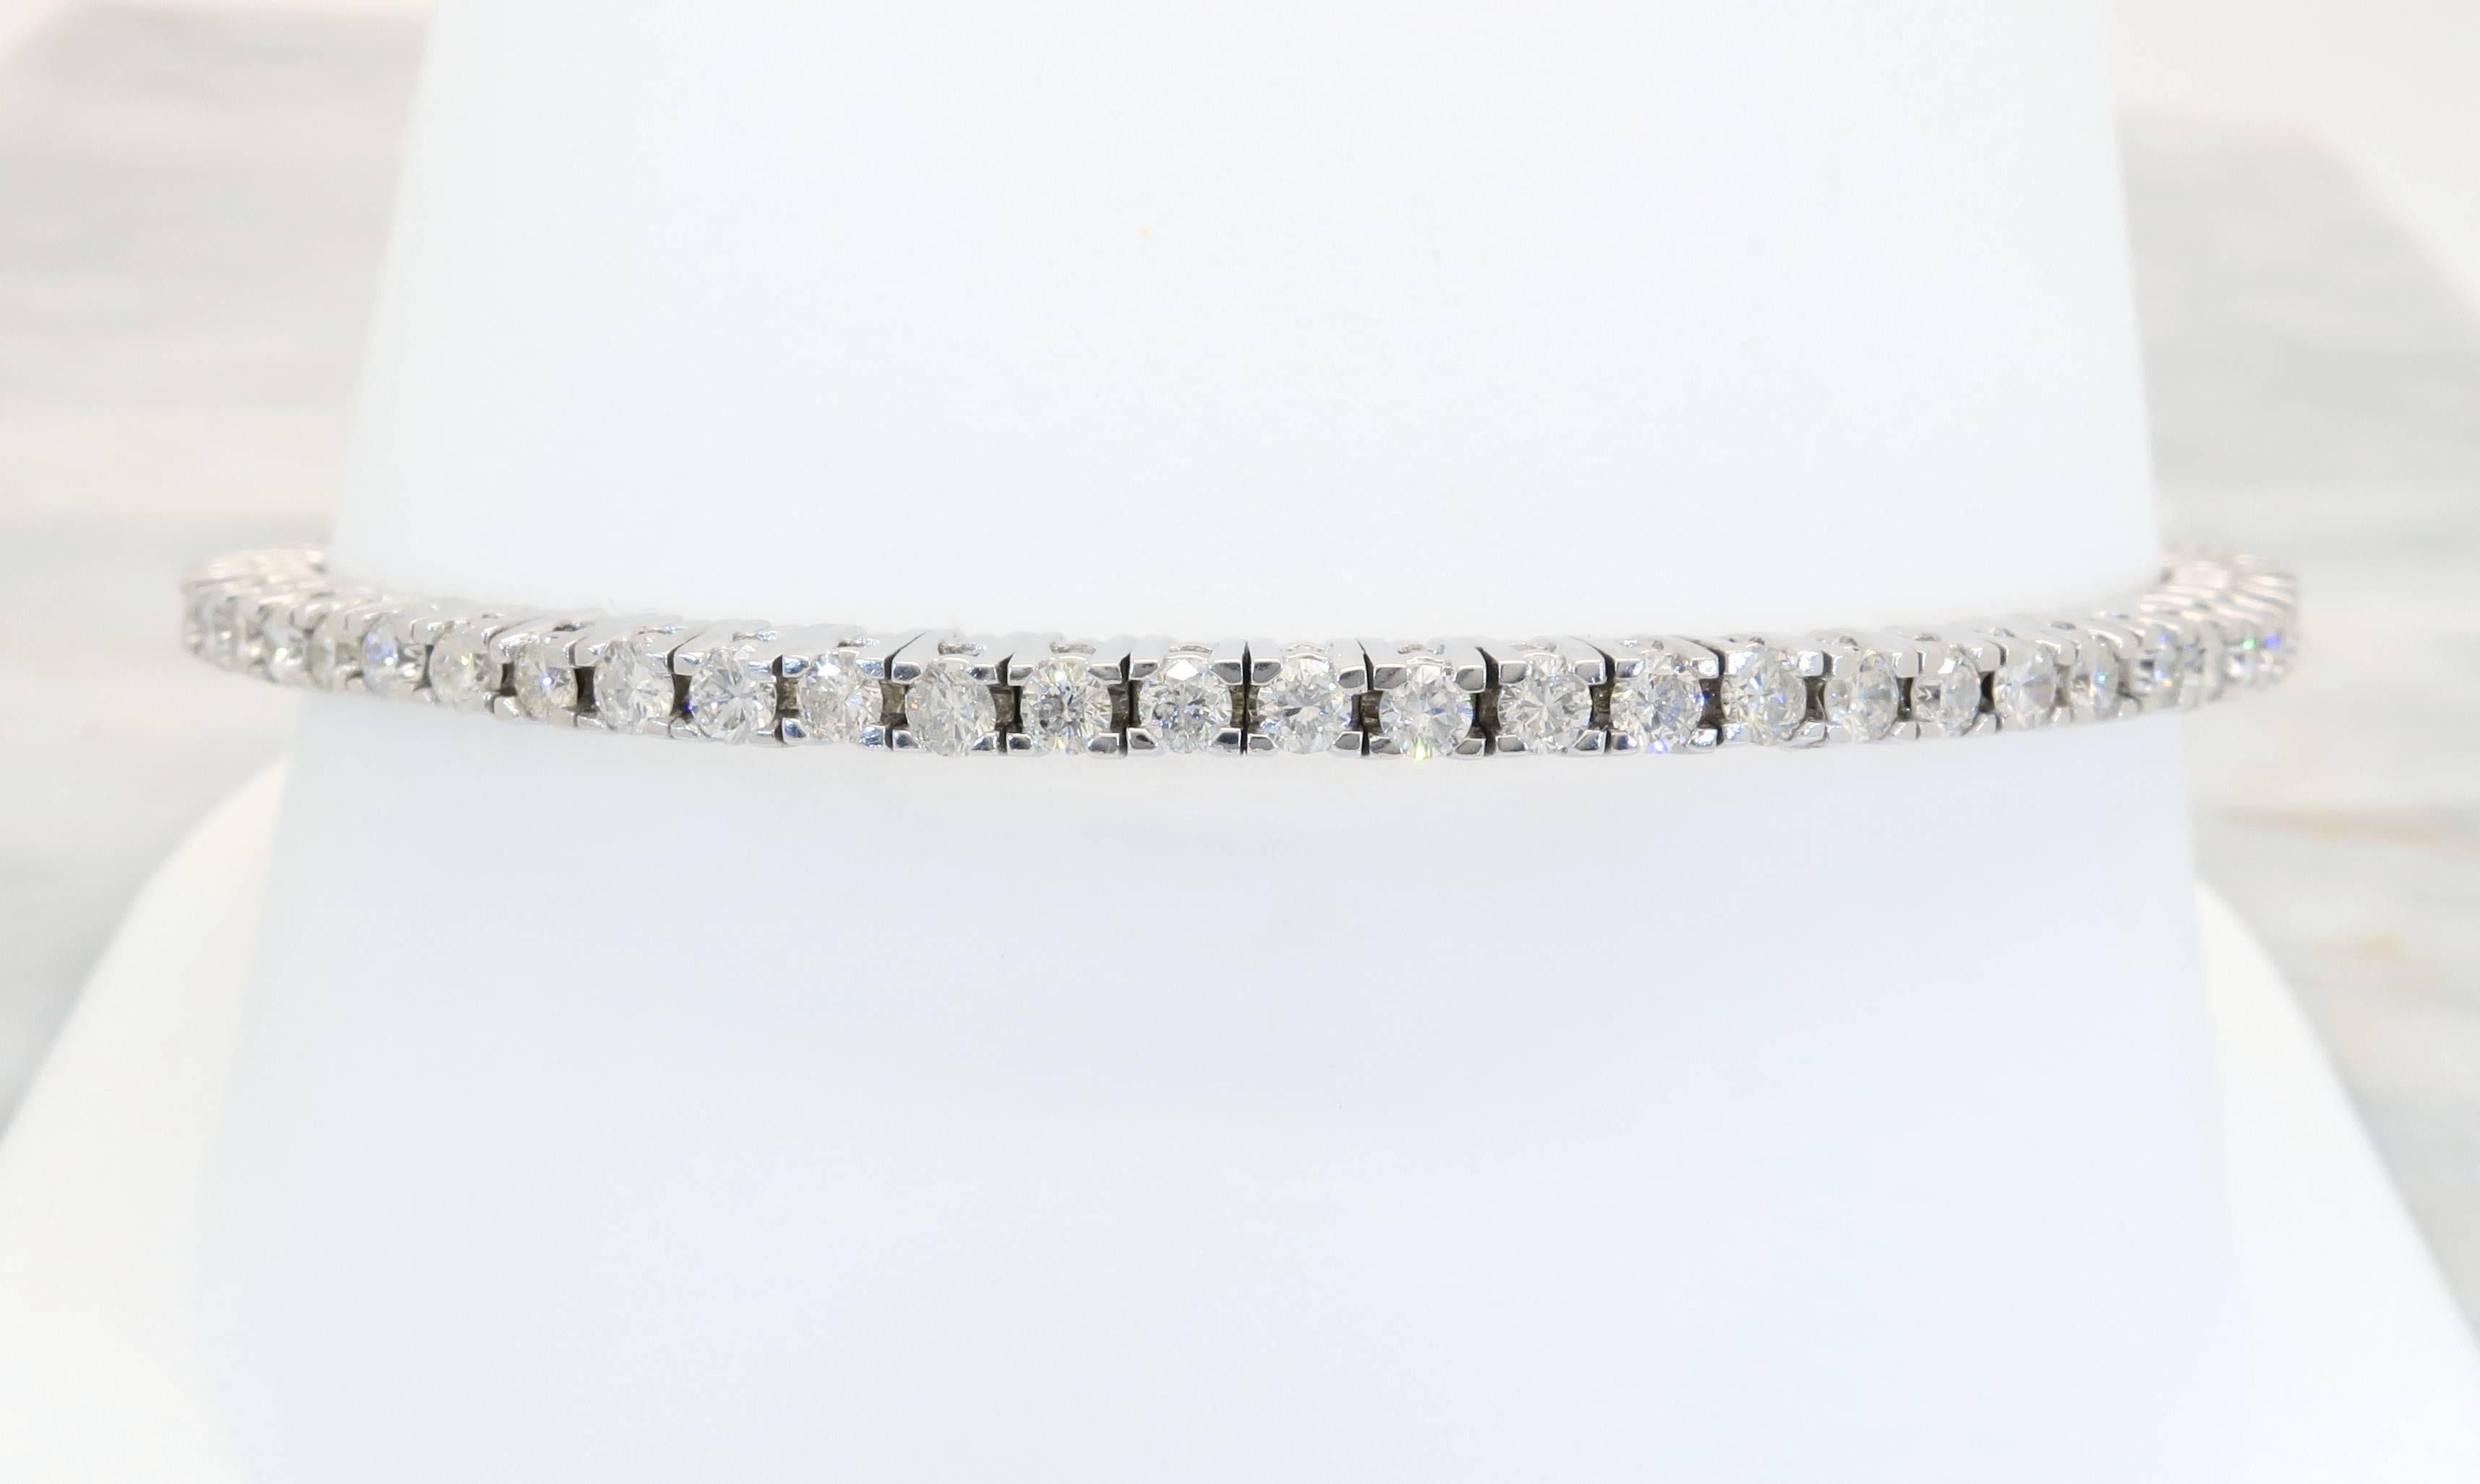 18k white gold and diamond bracelet holds 58 (fifty-eight) Round Brilliant cut diamonds. The diamonds have G-I color, and I-SI clarity with a total approximate carat weight of 2.32ctw. The bracelet is 6.5